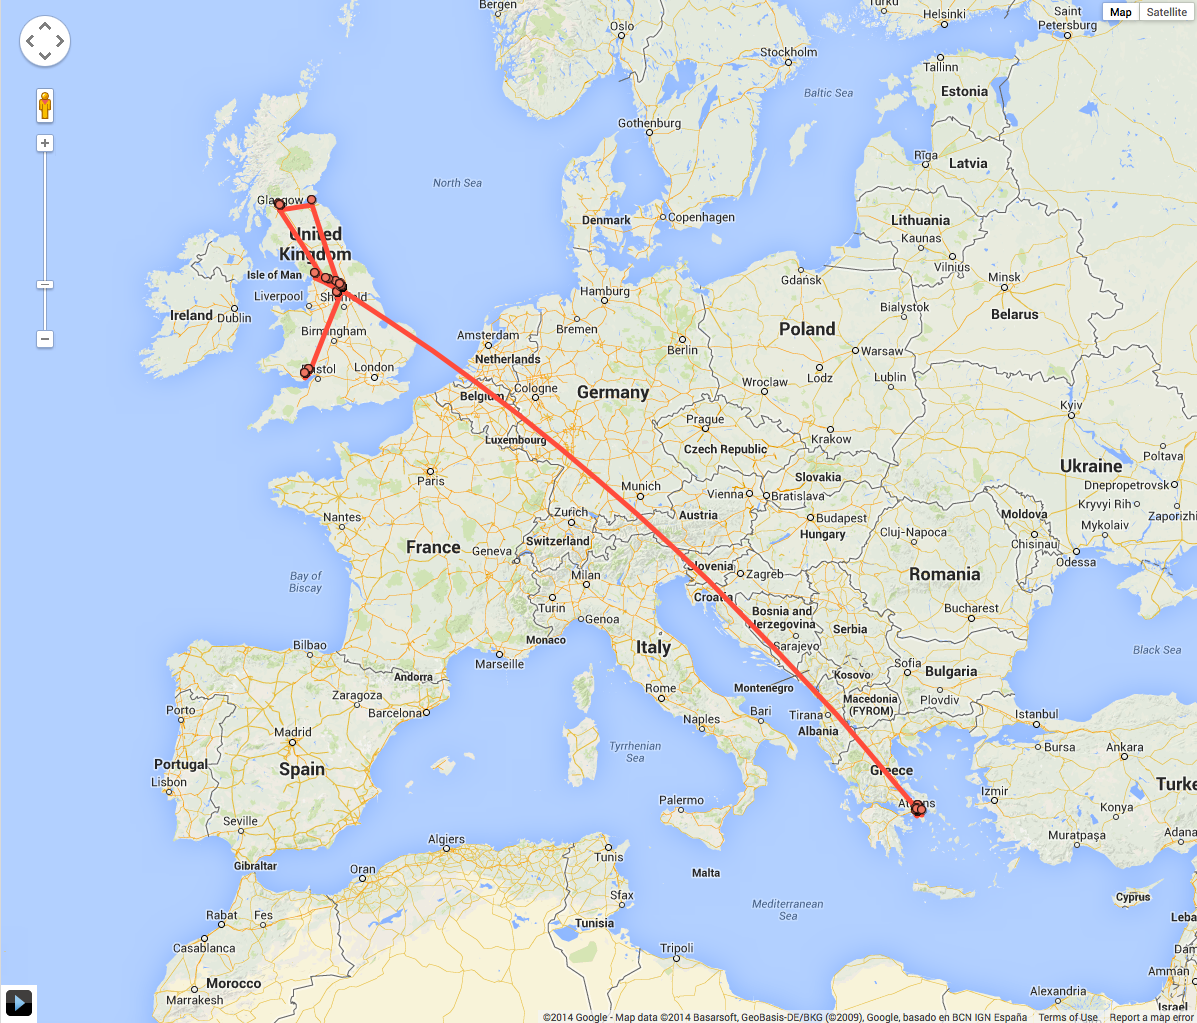 Nick's Google location history for one day